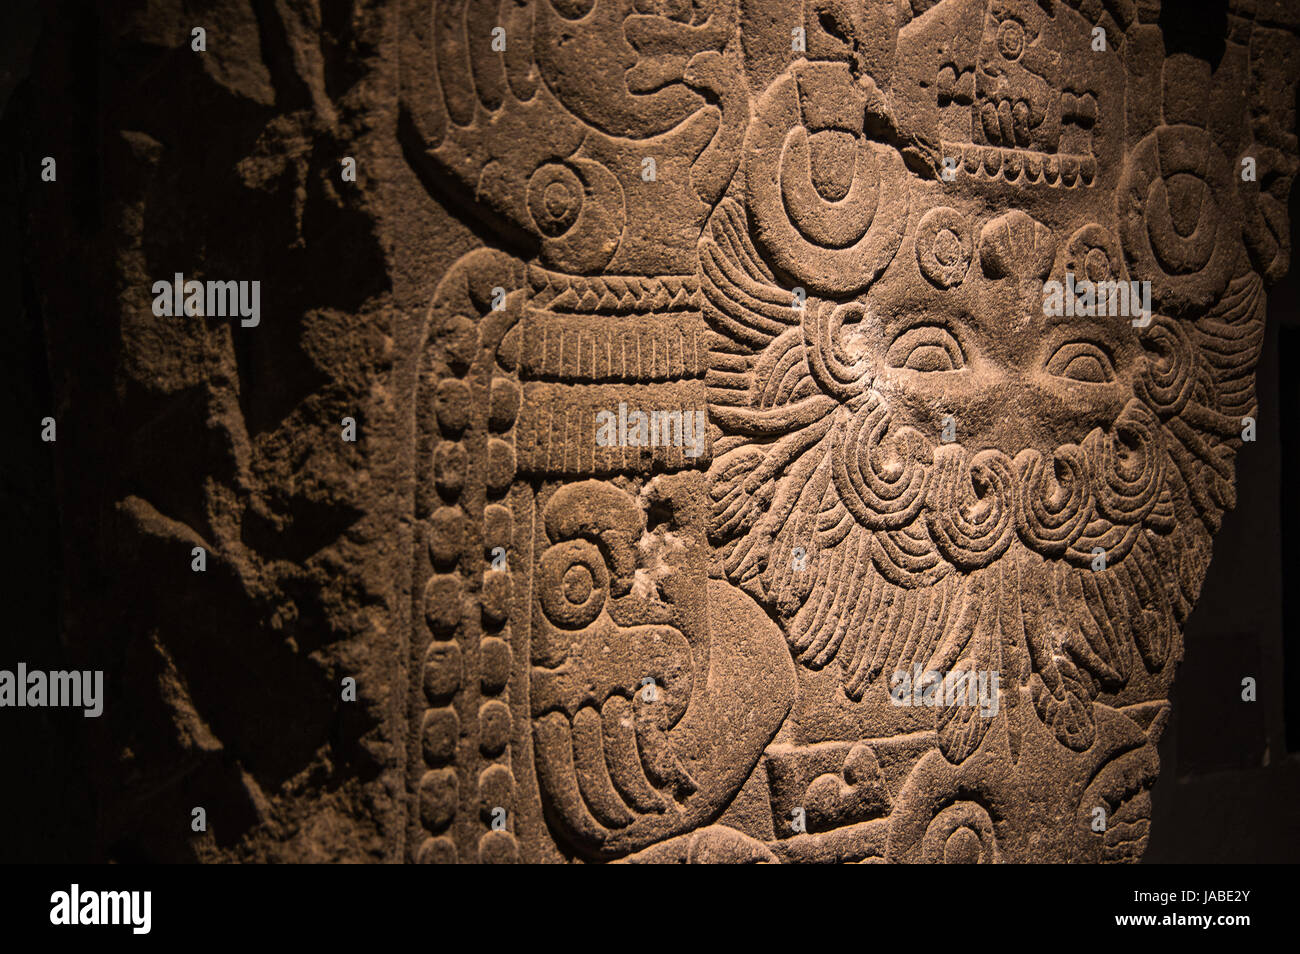 The Aztec ruins of Templo Mayor, a UNESCO World Heritage site, in Mexico City Stock Photo